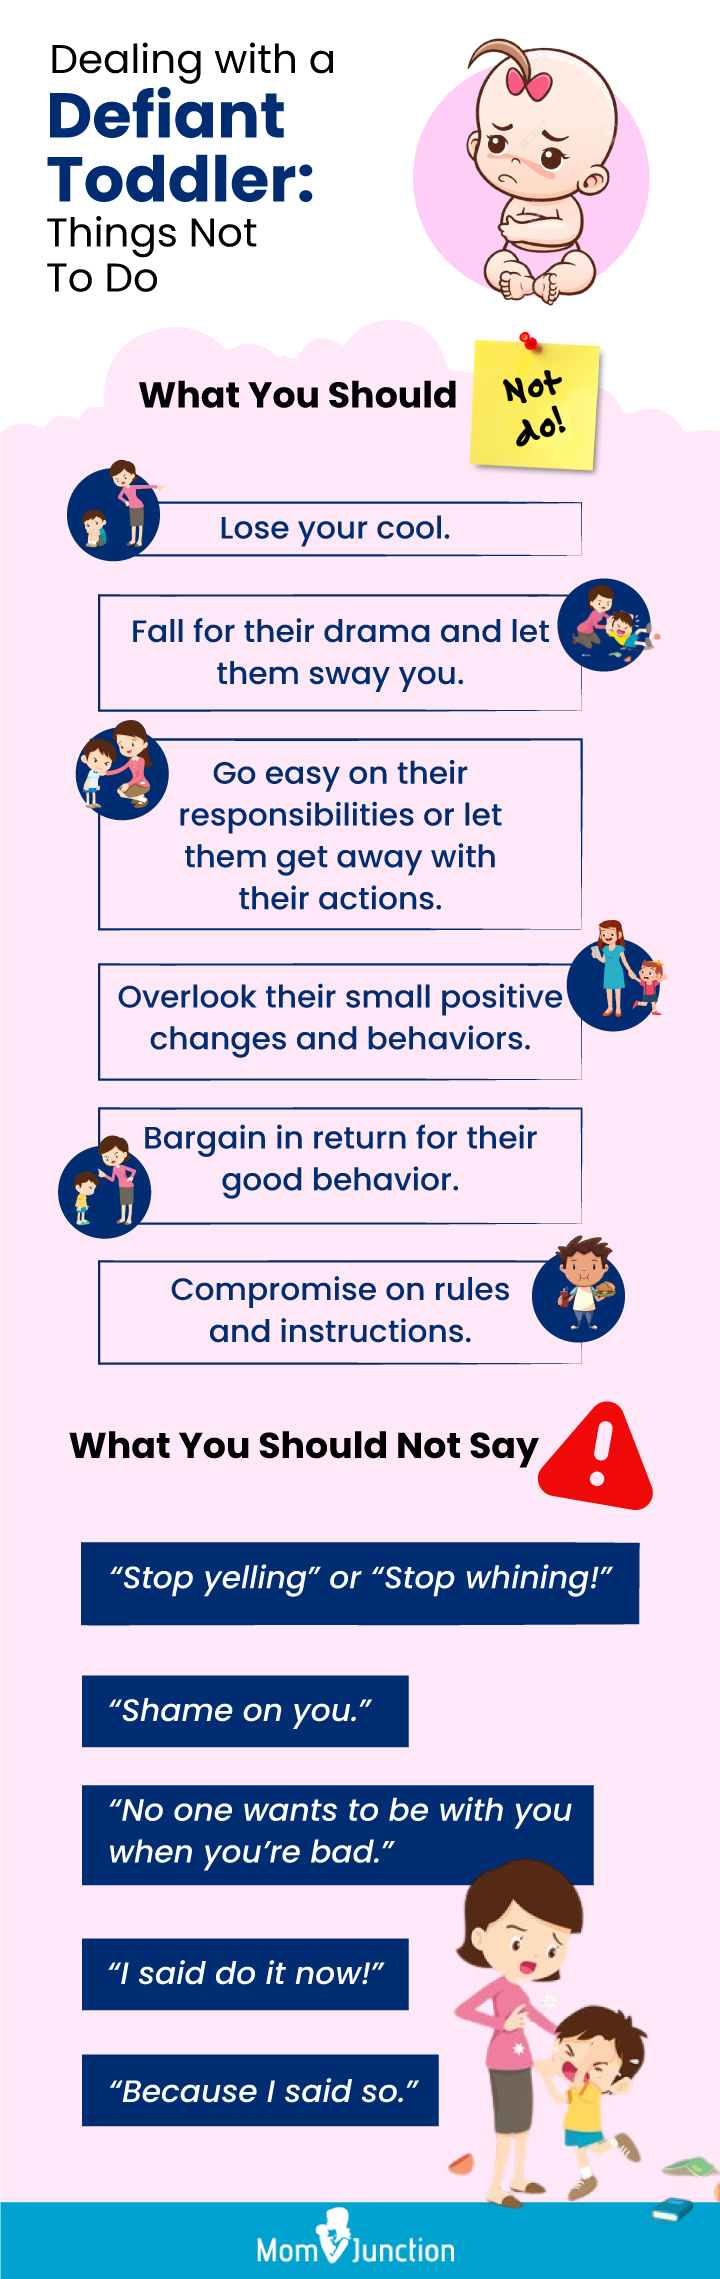 dealing with a defiant toddler [infographic]